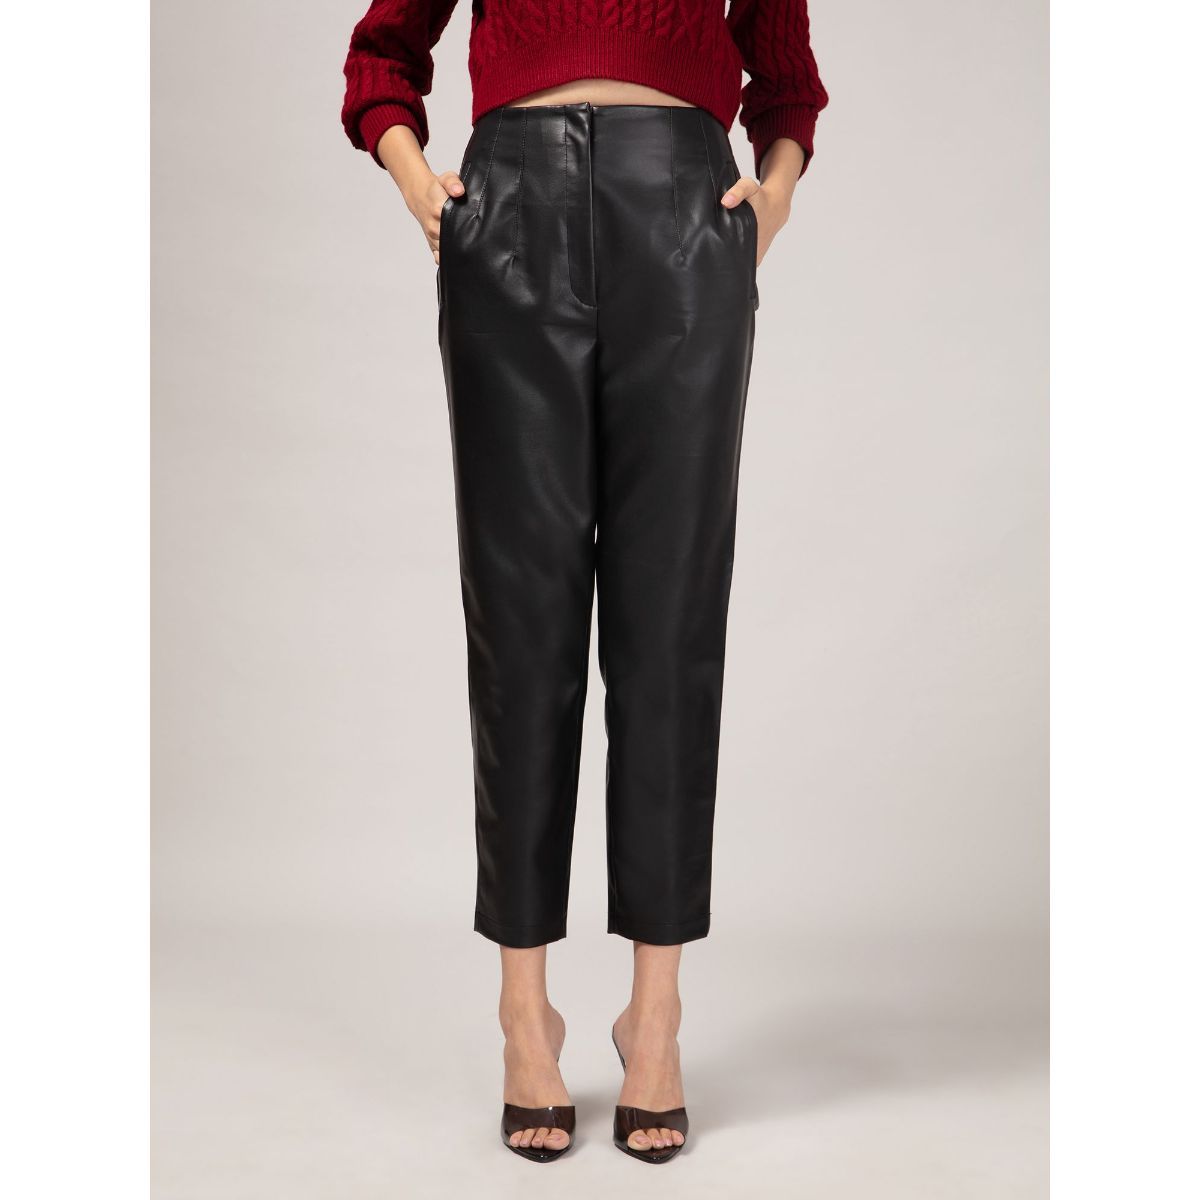 Buy Womens Long Faux Leather High Waisted Trousers Online  Next UK